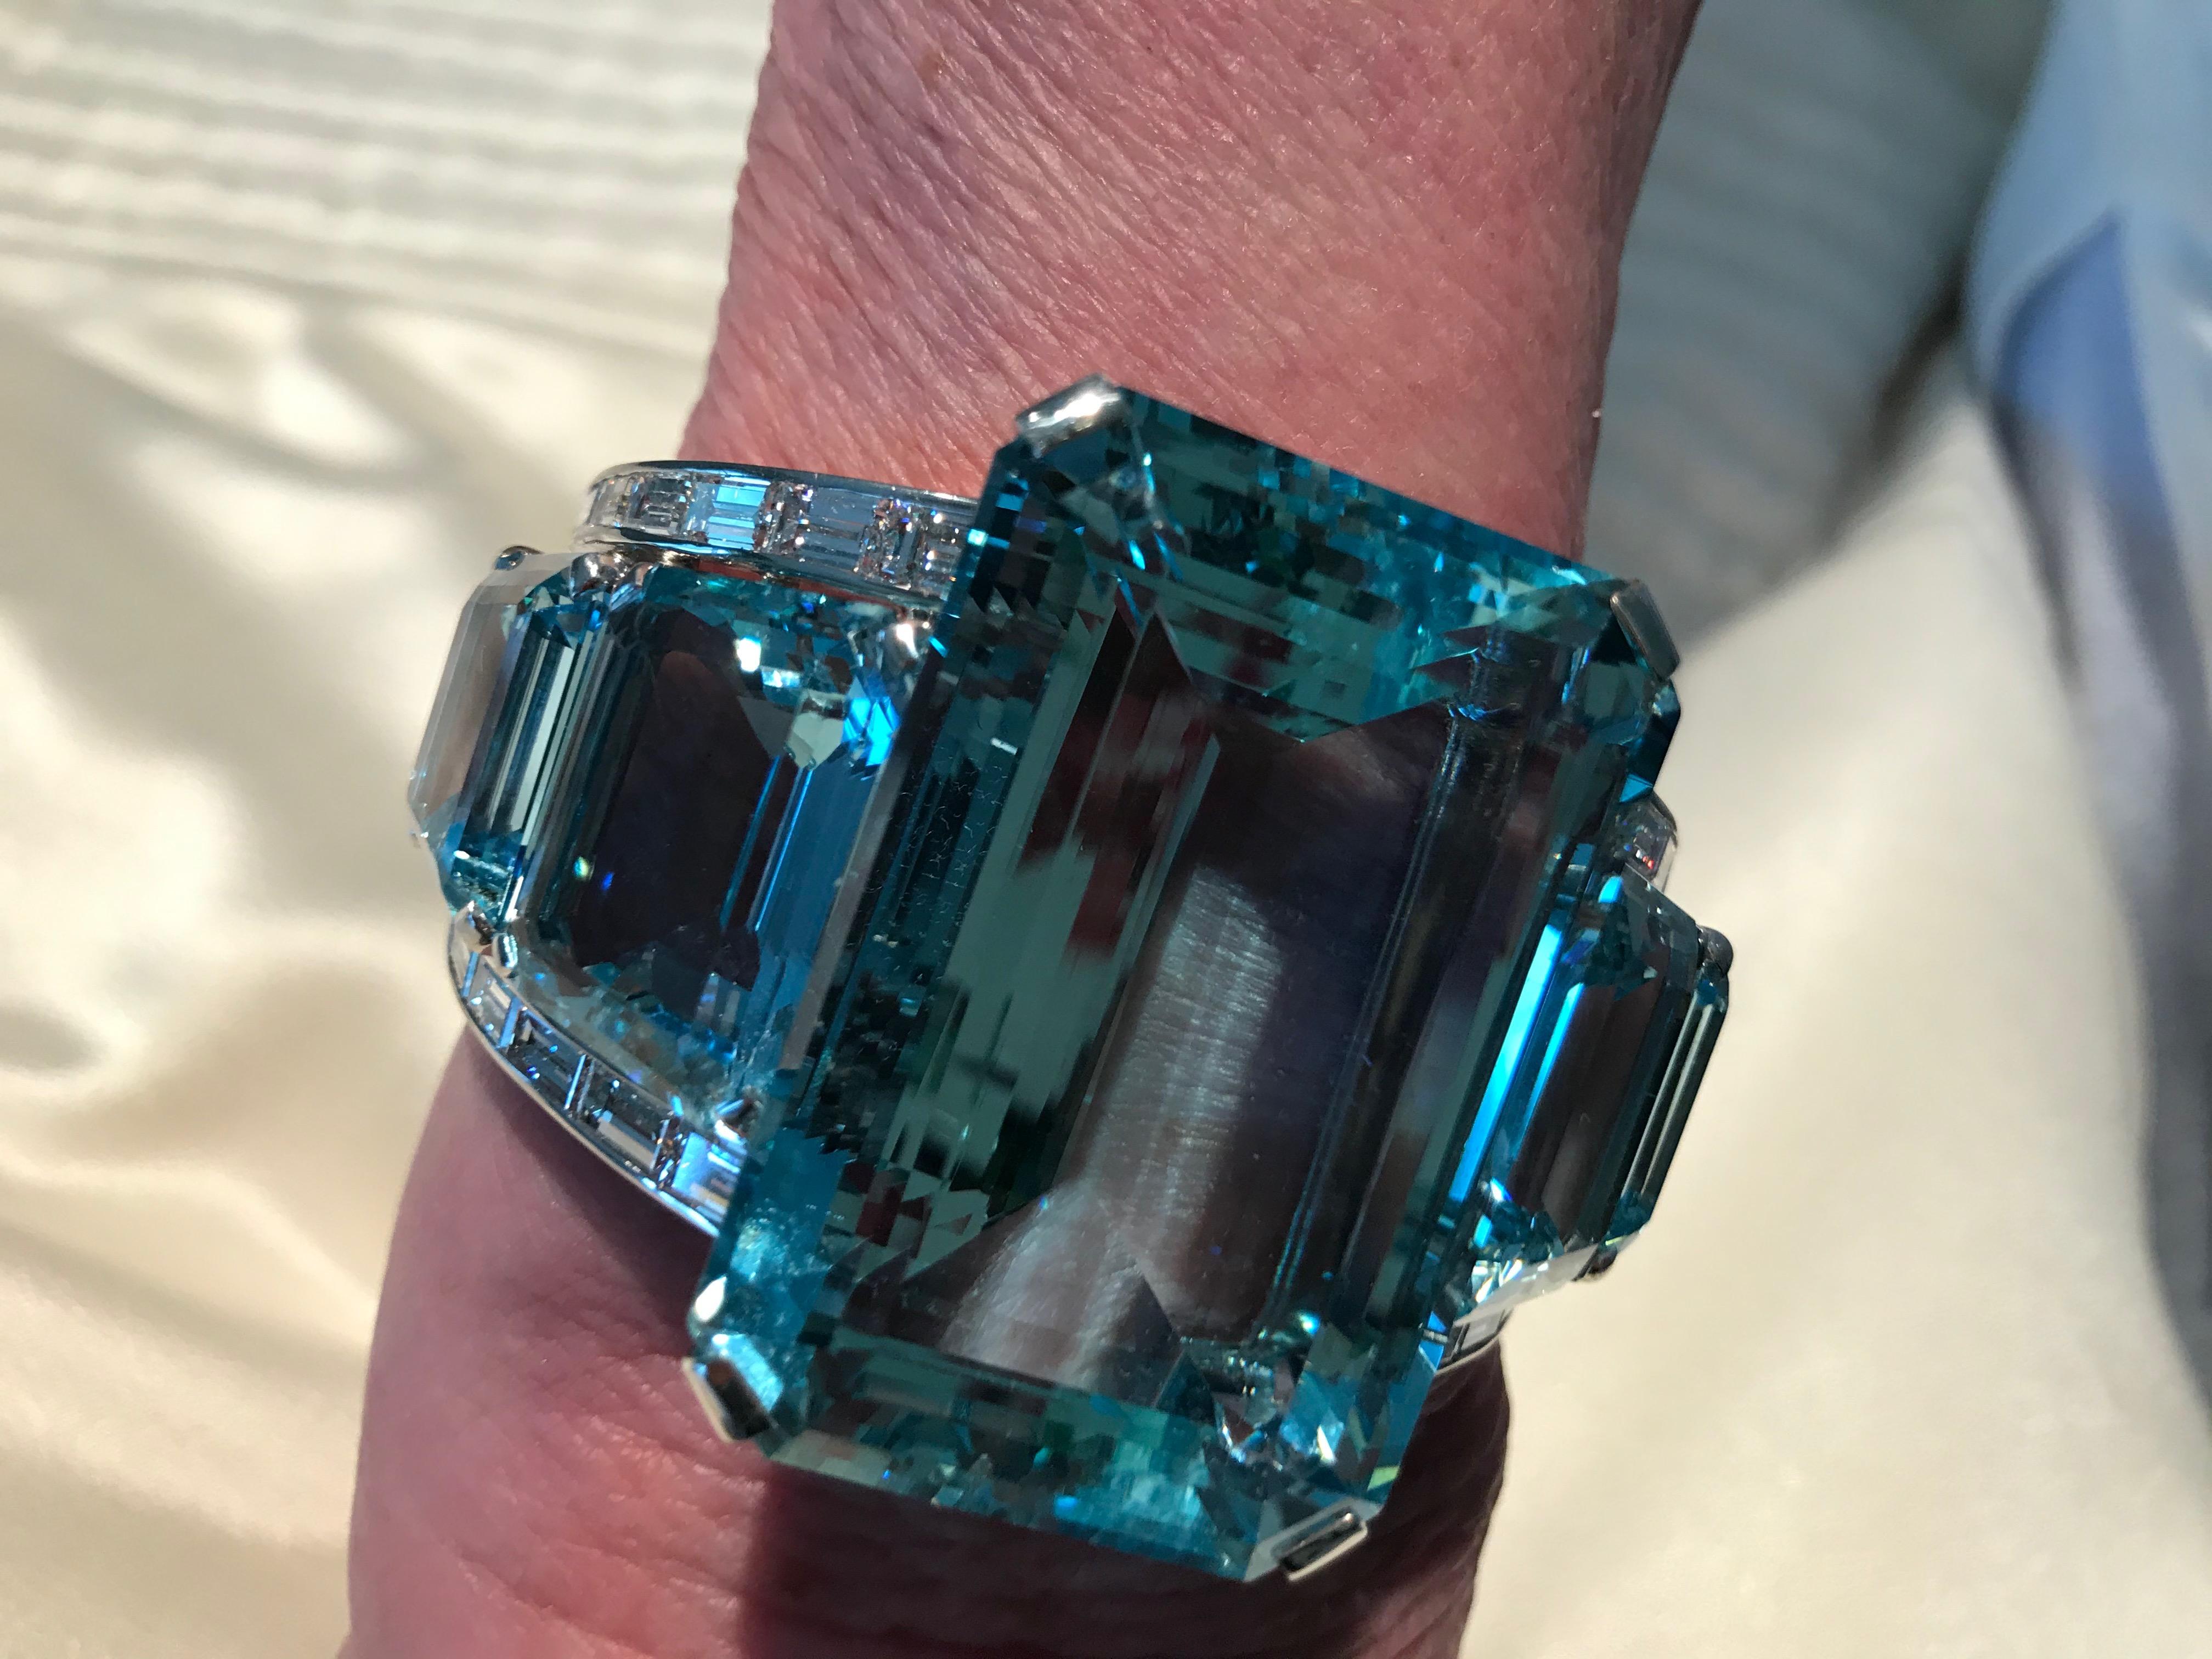 This one of a kind impressive bangle is set in platinum. The center features one large emerald cut Aquamarine weighing 181cts and is flanked by four fancy cut Aquamarine's weighing approximately 60cts in total. The, Aquamarine's are accented by